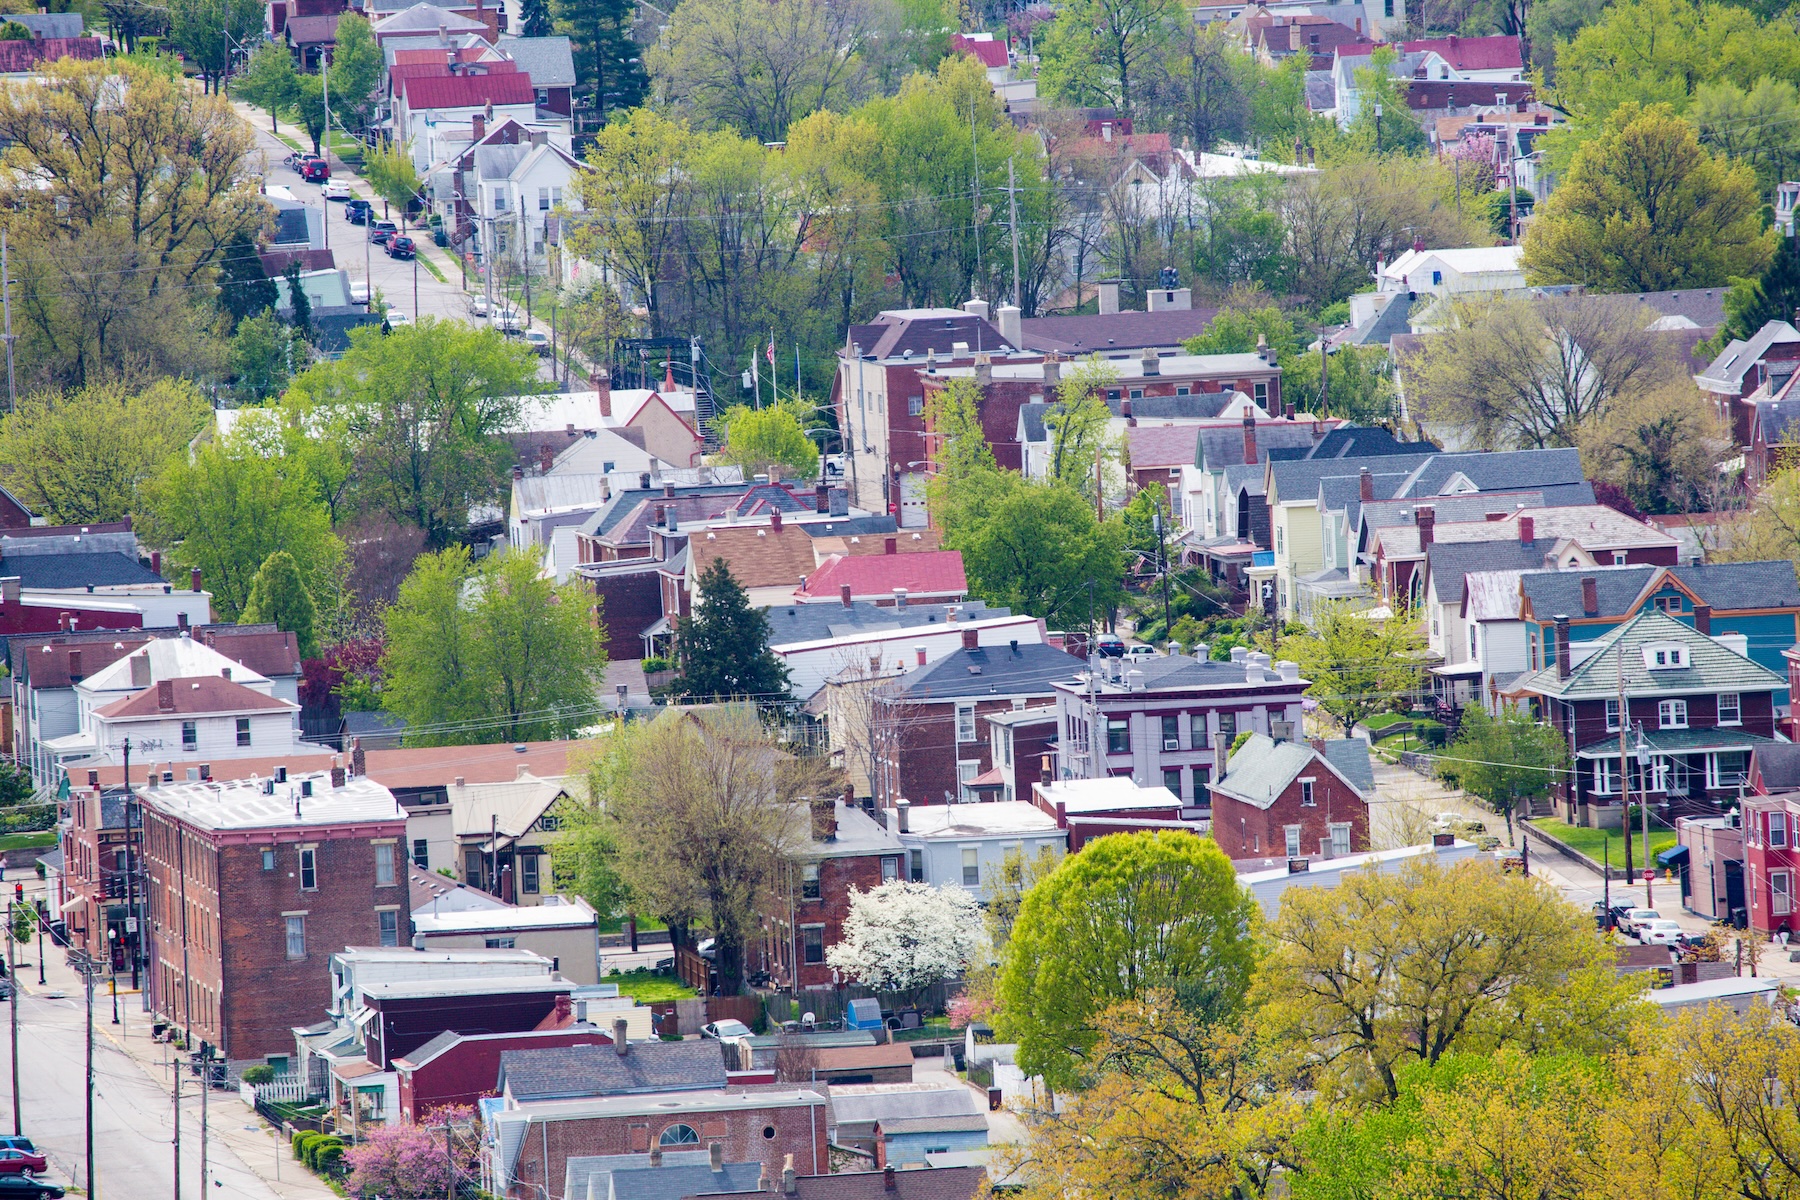 Aerial view of houses and building in Covington Kentucky